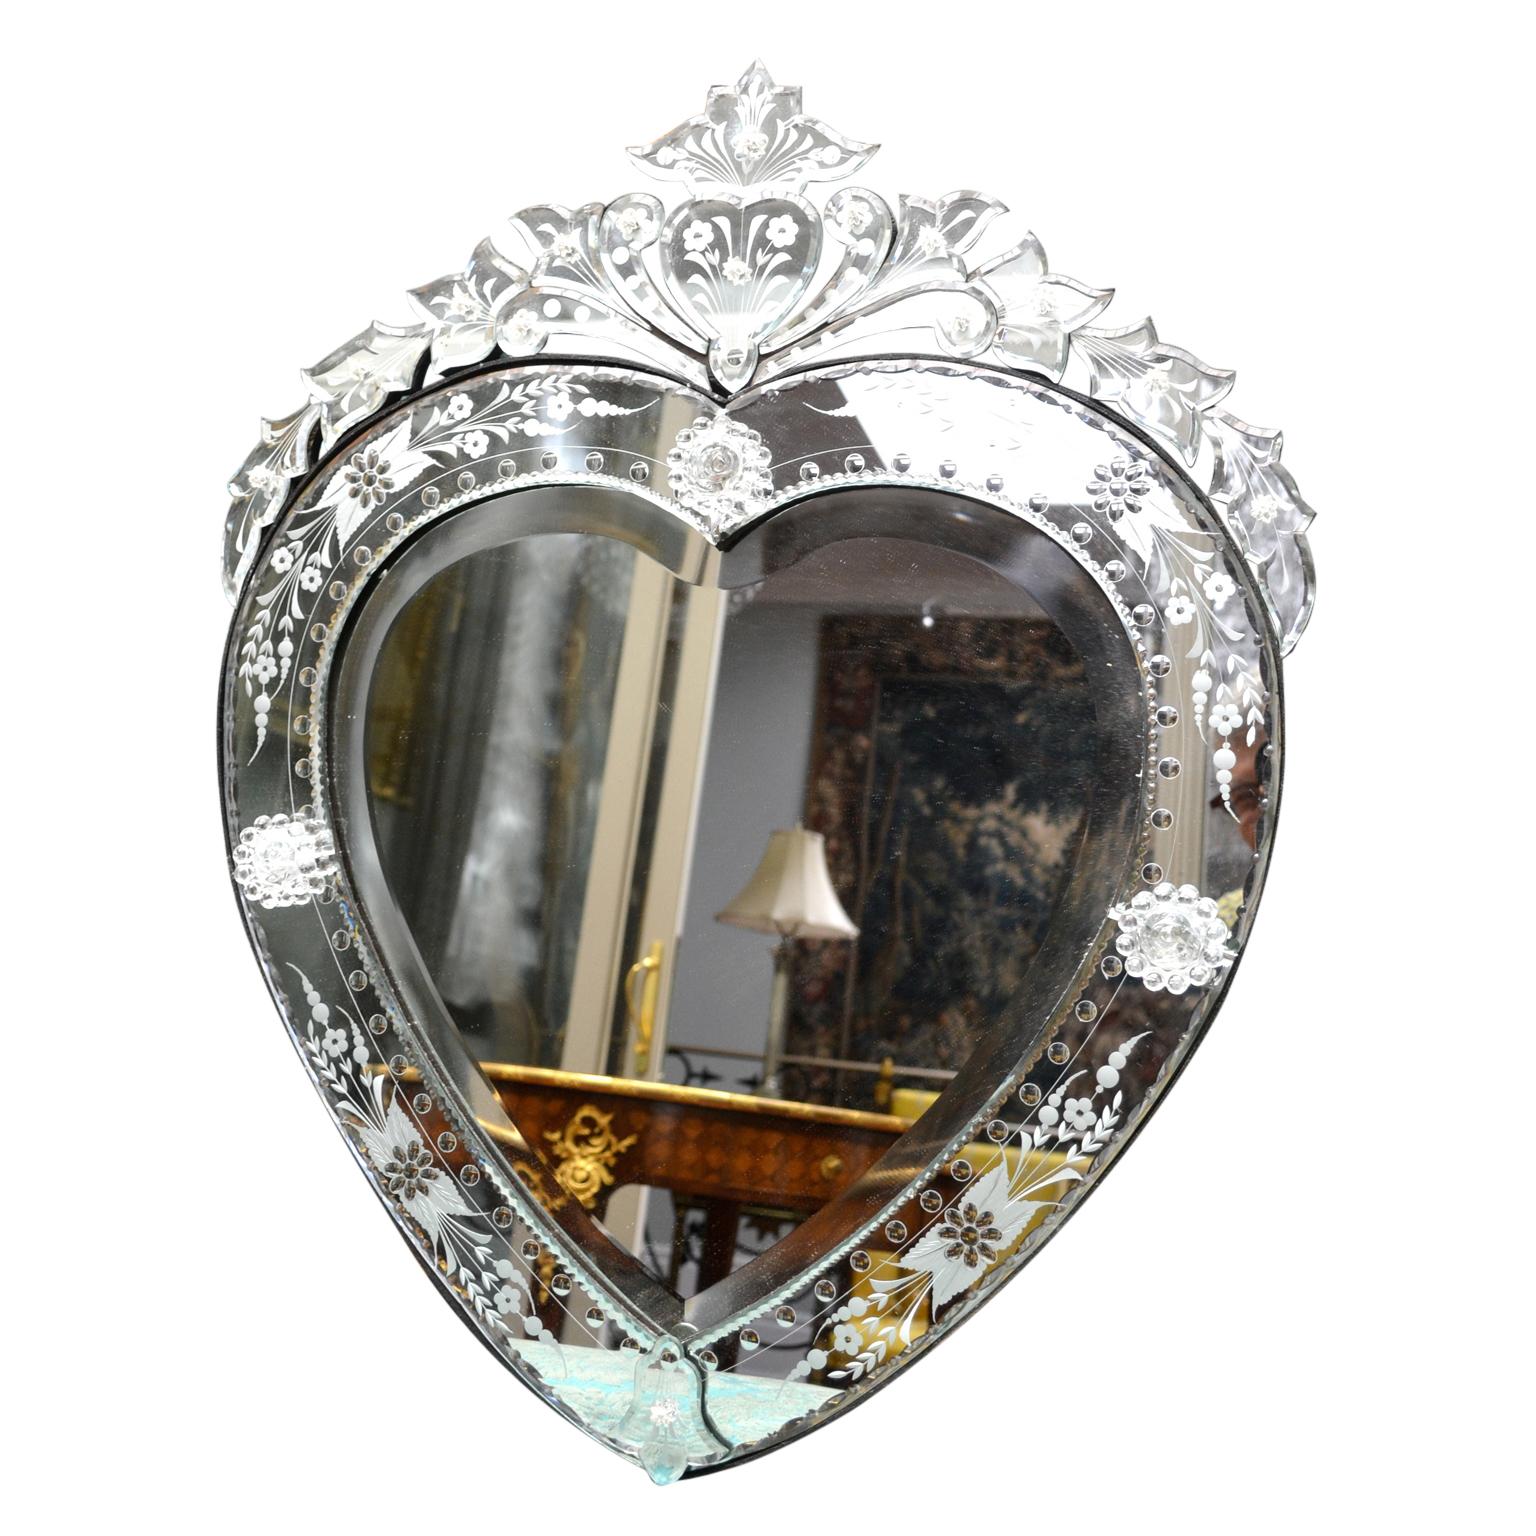 A decorative heart shaped Venetian beveled glass mirror with an edged glass border and domed top.